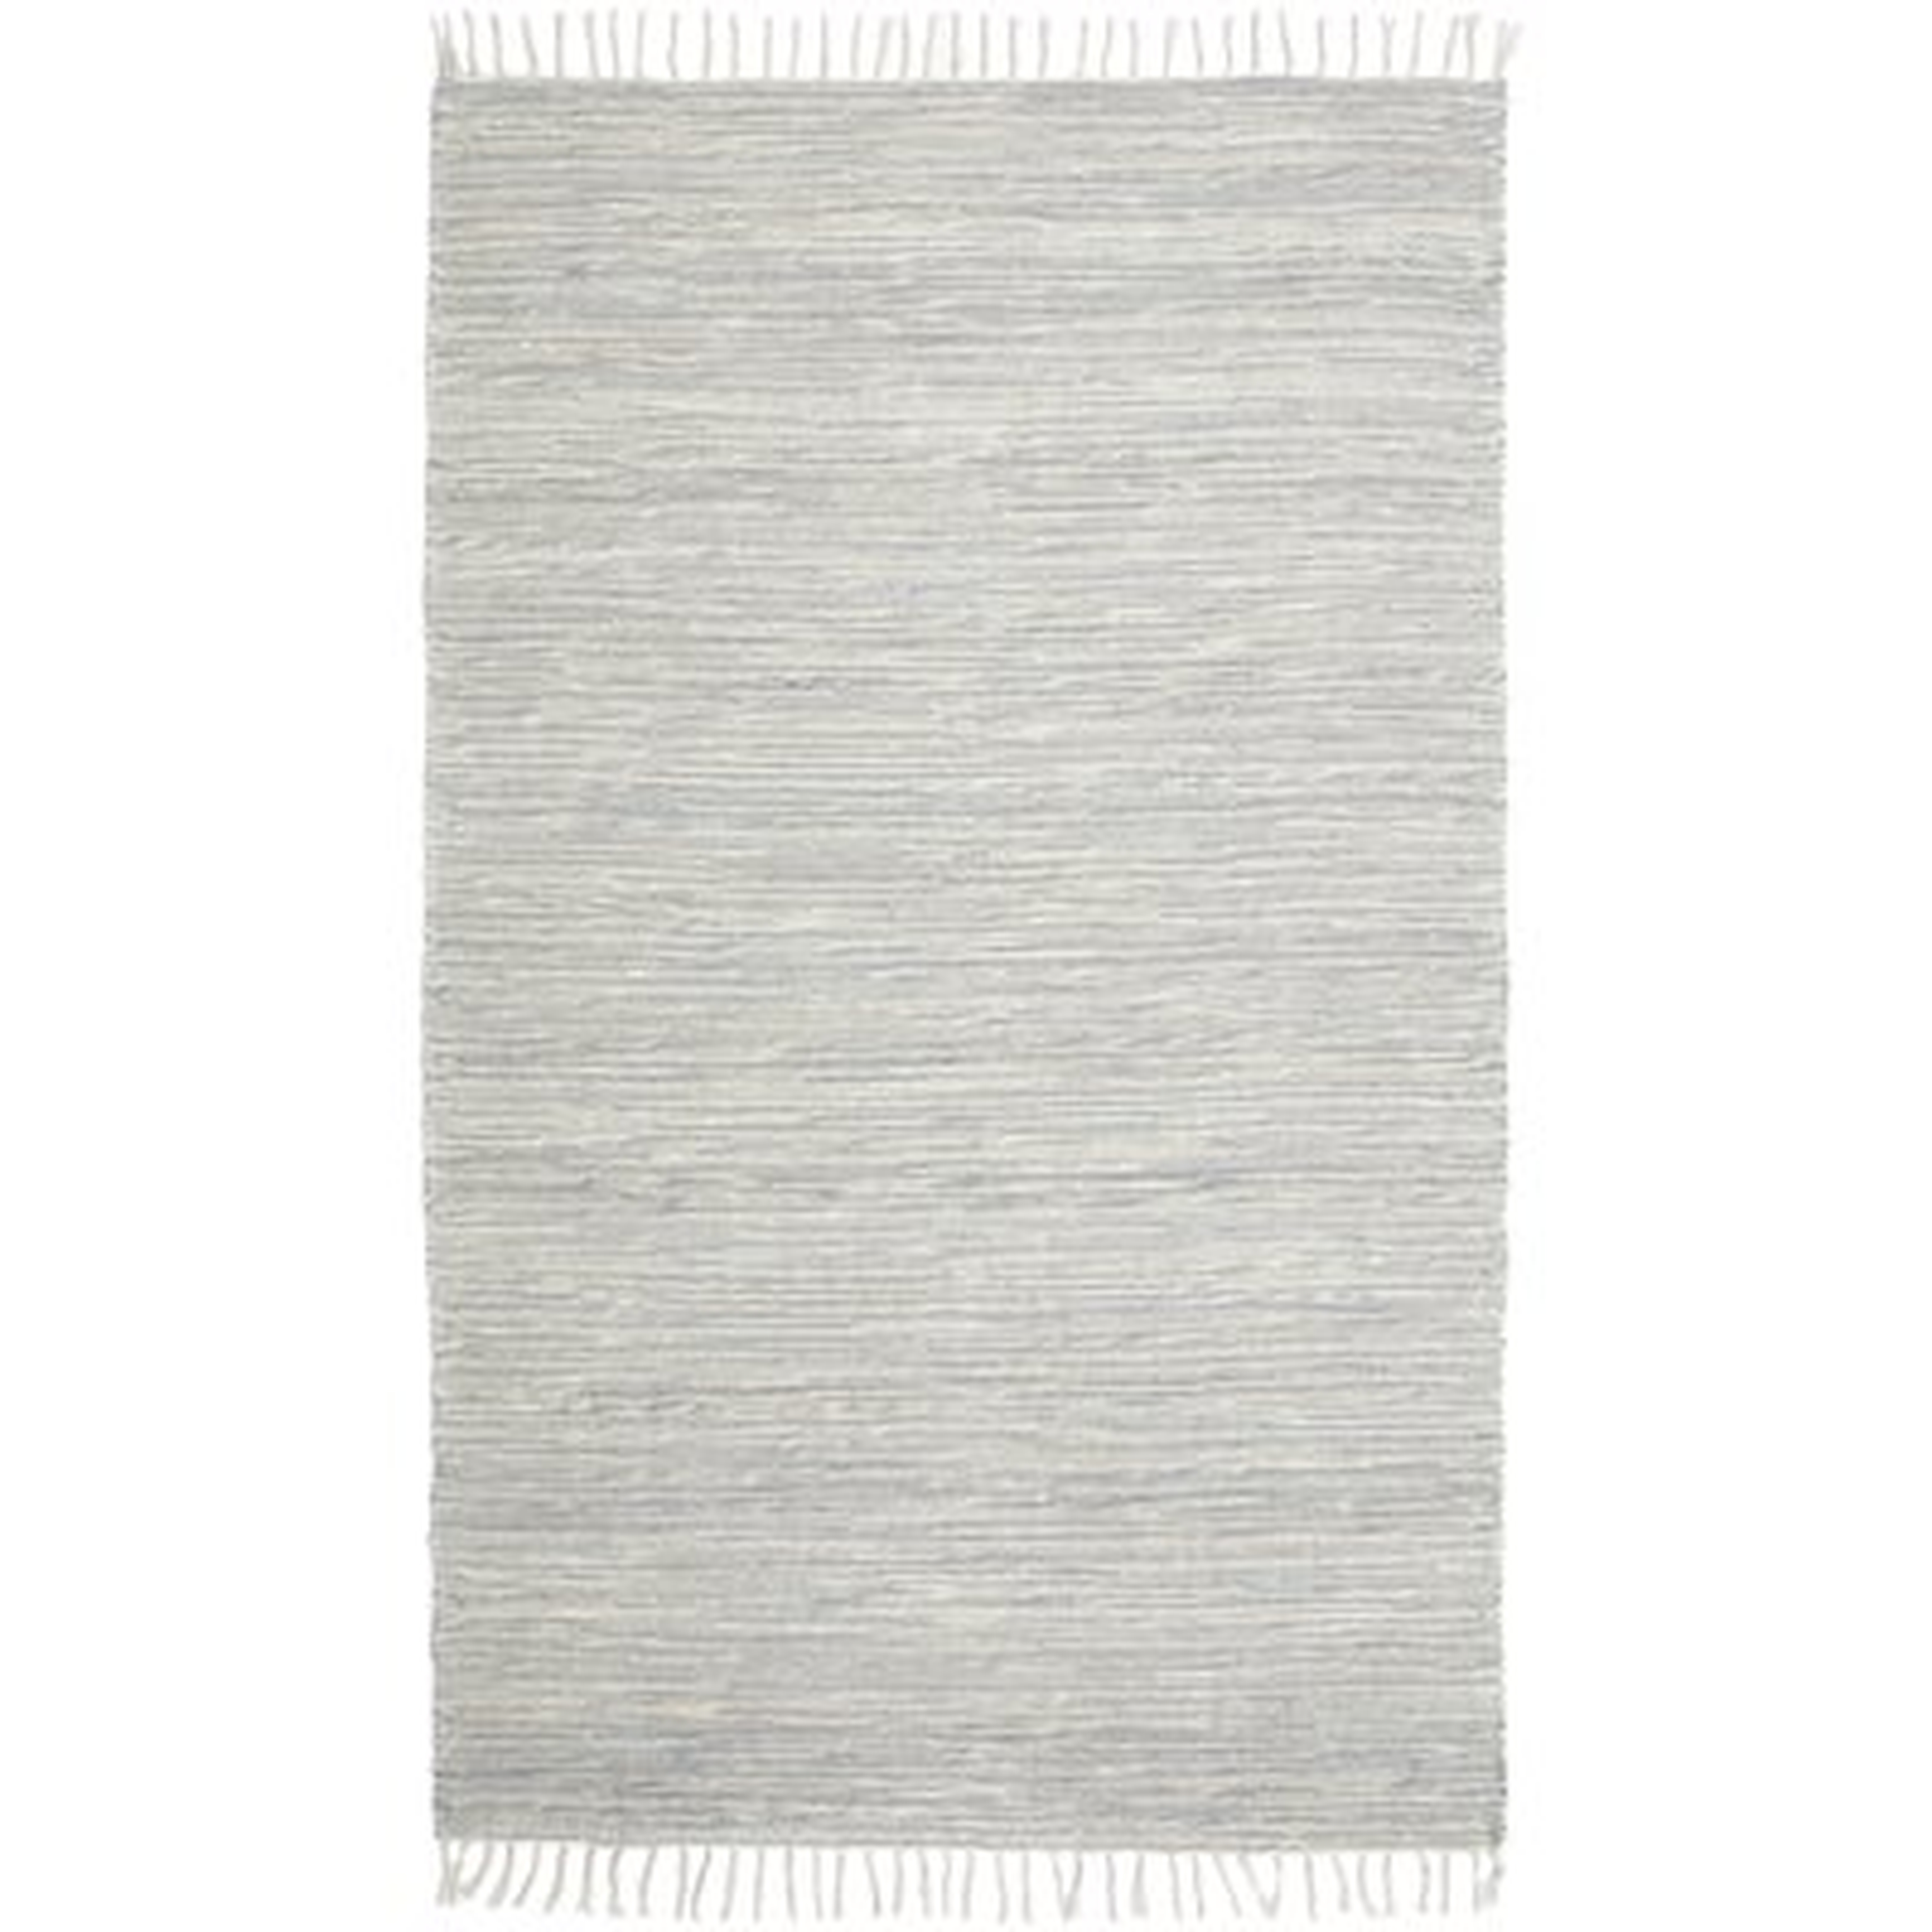 Rectangle 8' x 10' Parley Striped Chenille Handwoven Flatweave Cotton Gray/White Area Rug - Wayfair